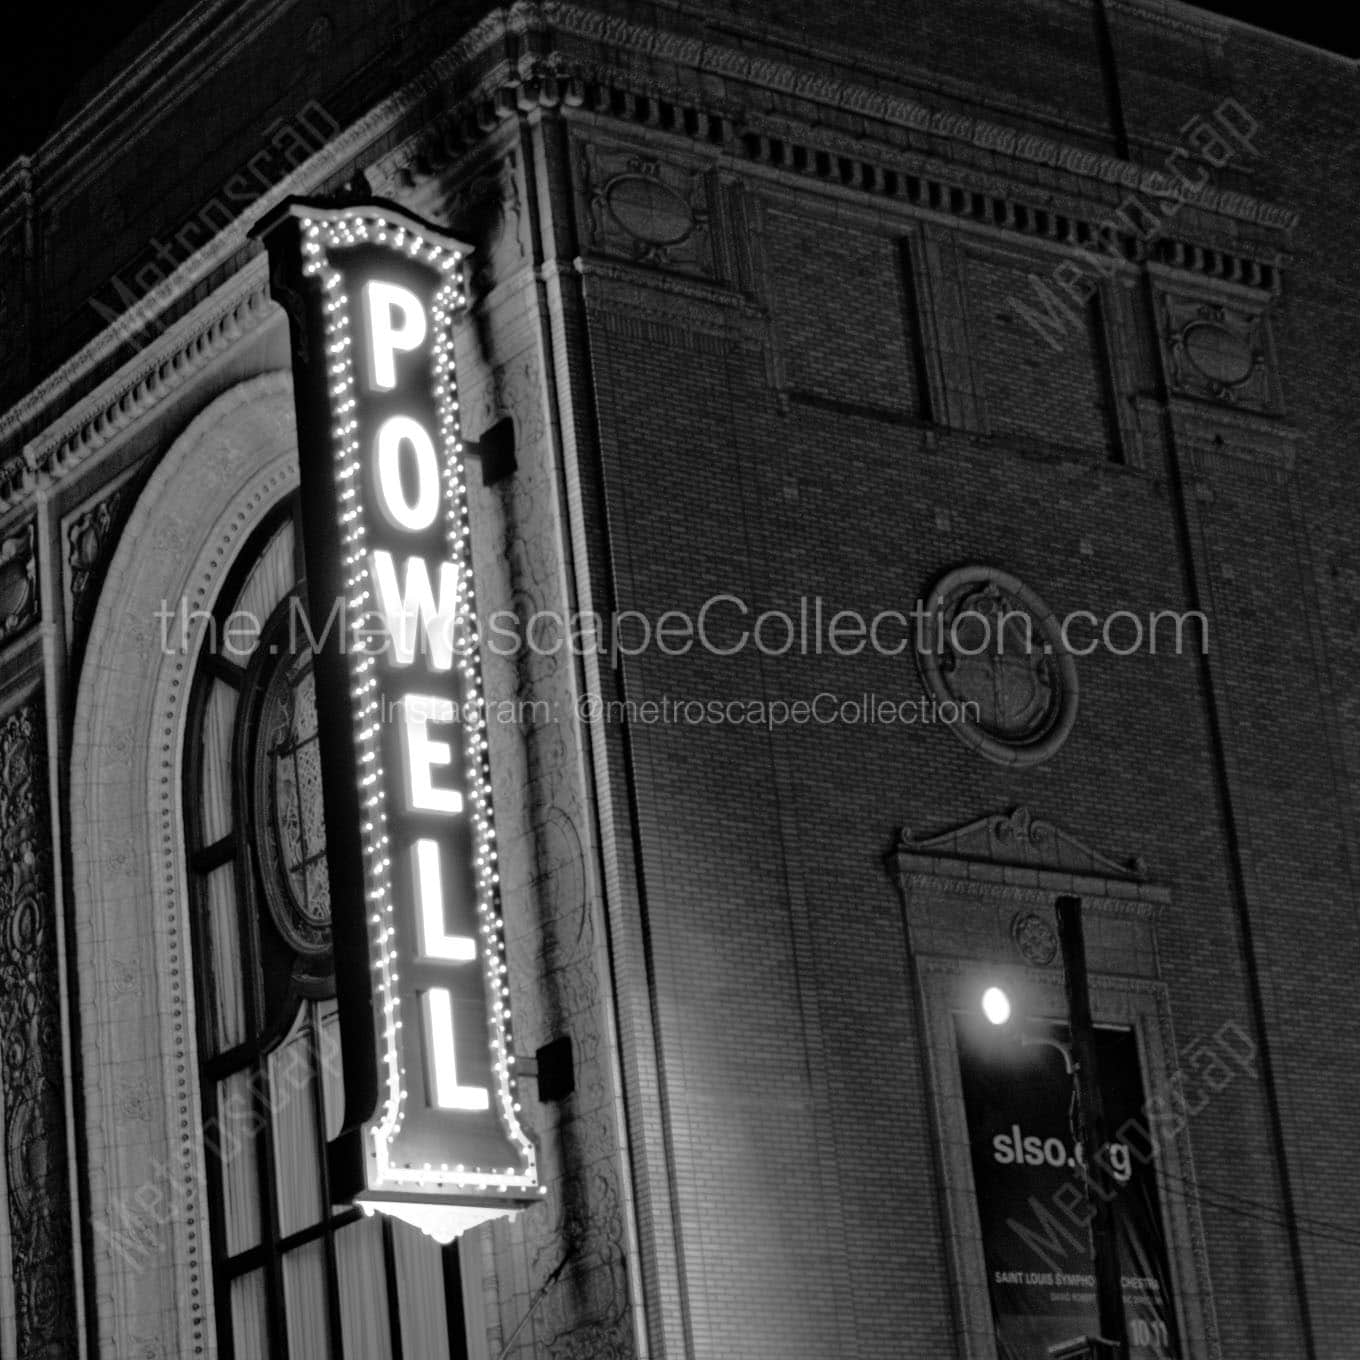 powell theater sign at night Black & White Wall Art